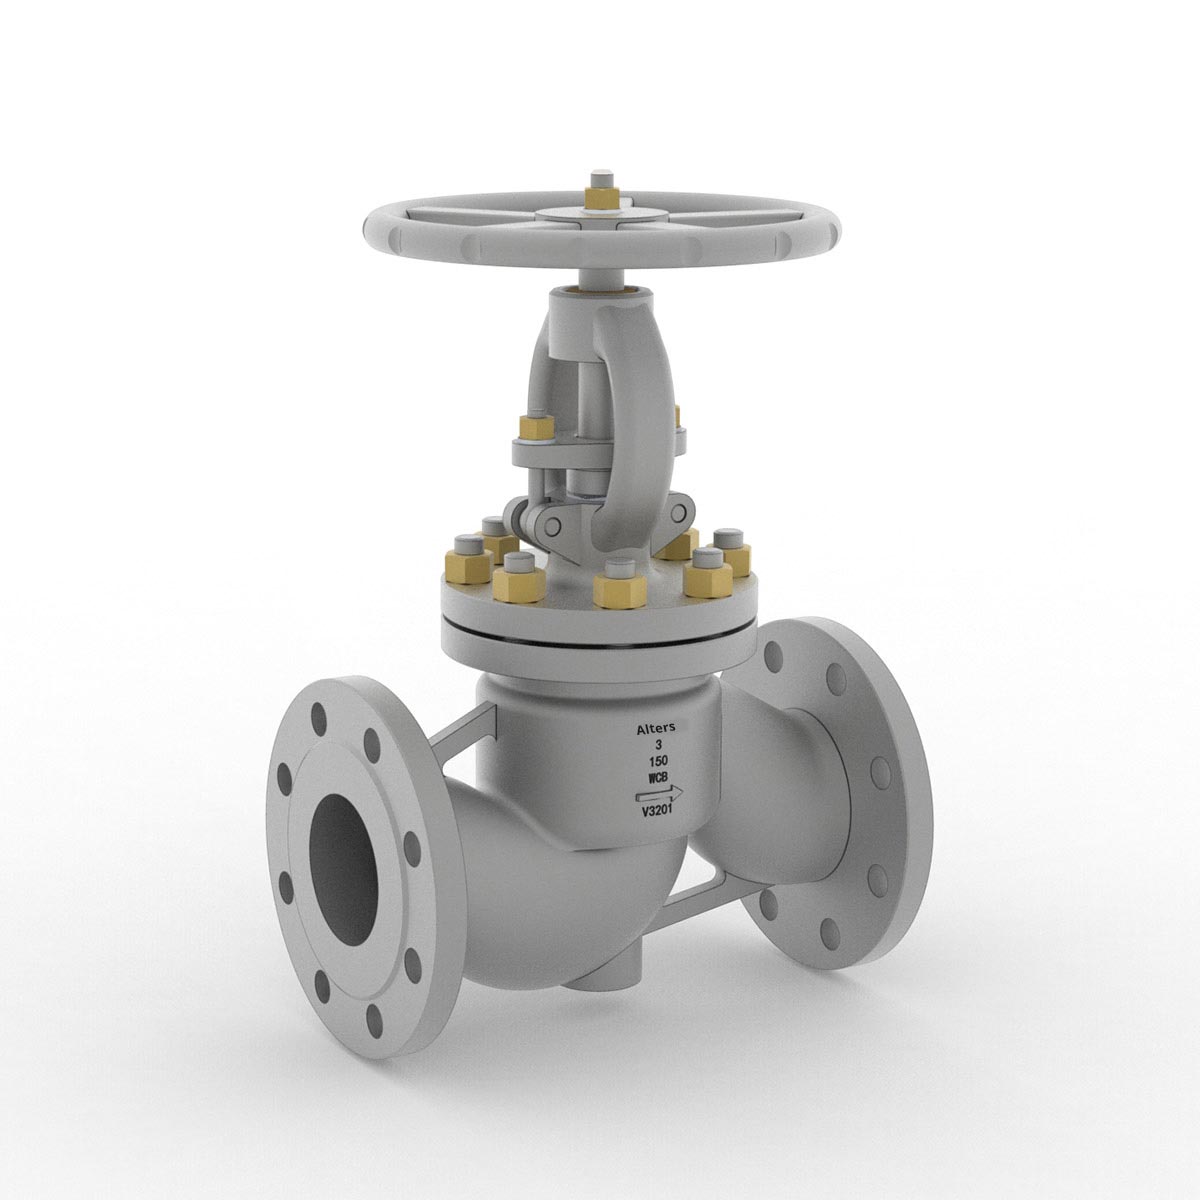 Image of a globe valve from AlterValve with company name and specifications.